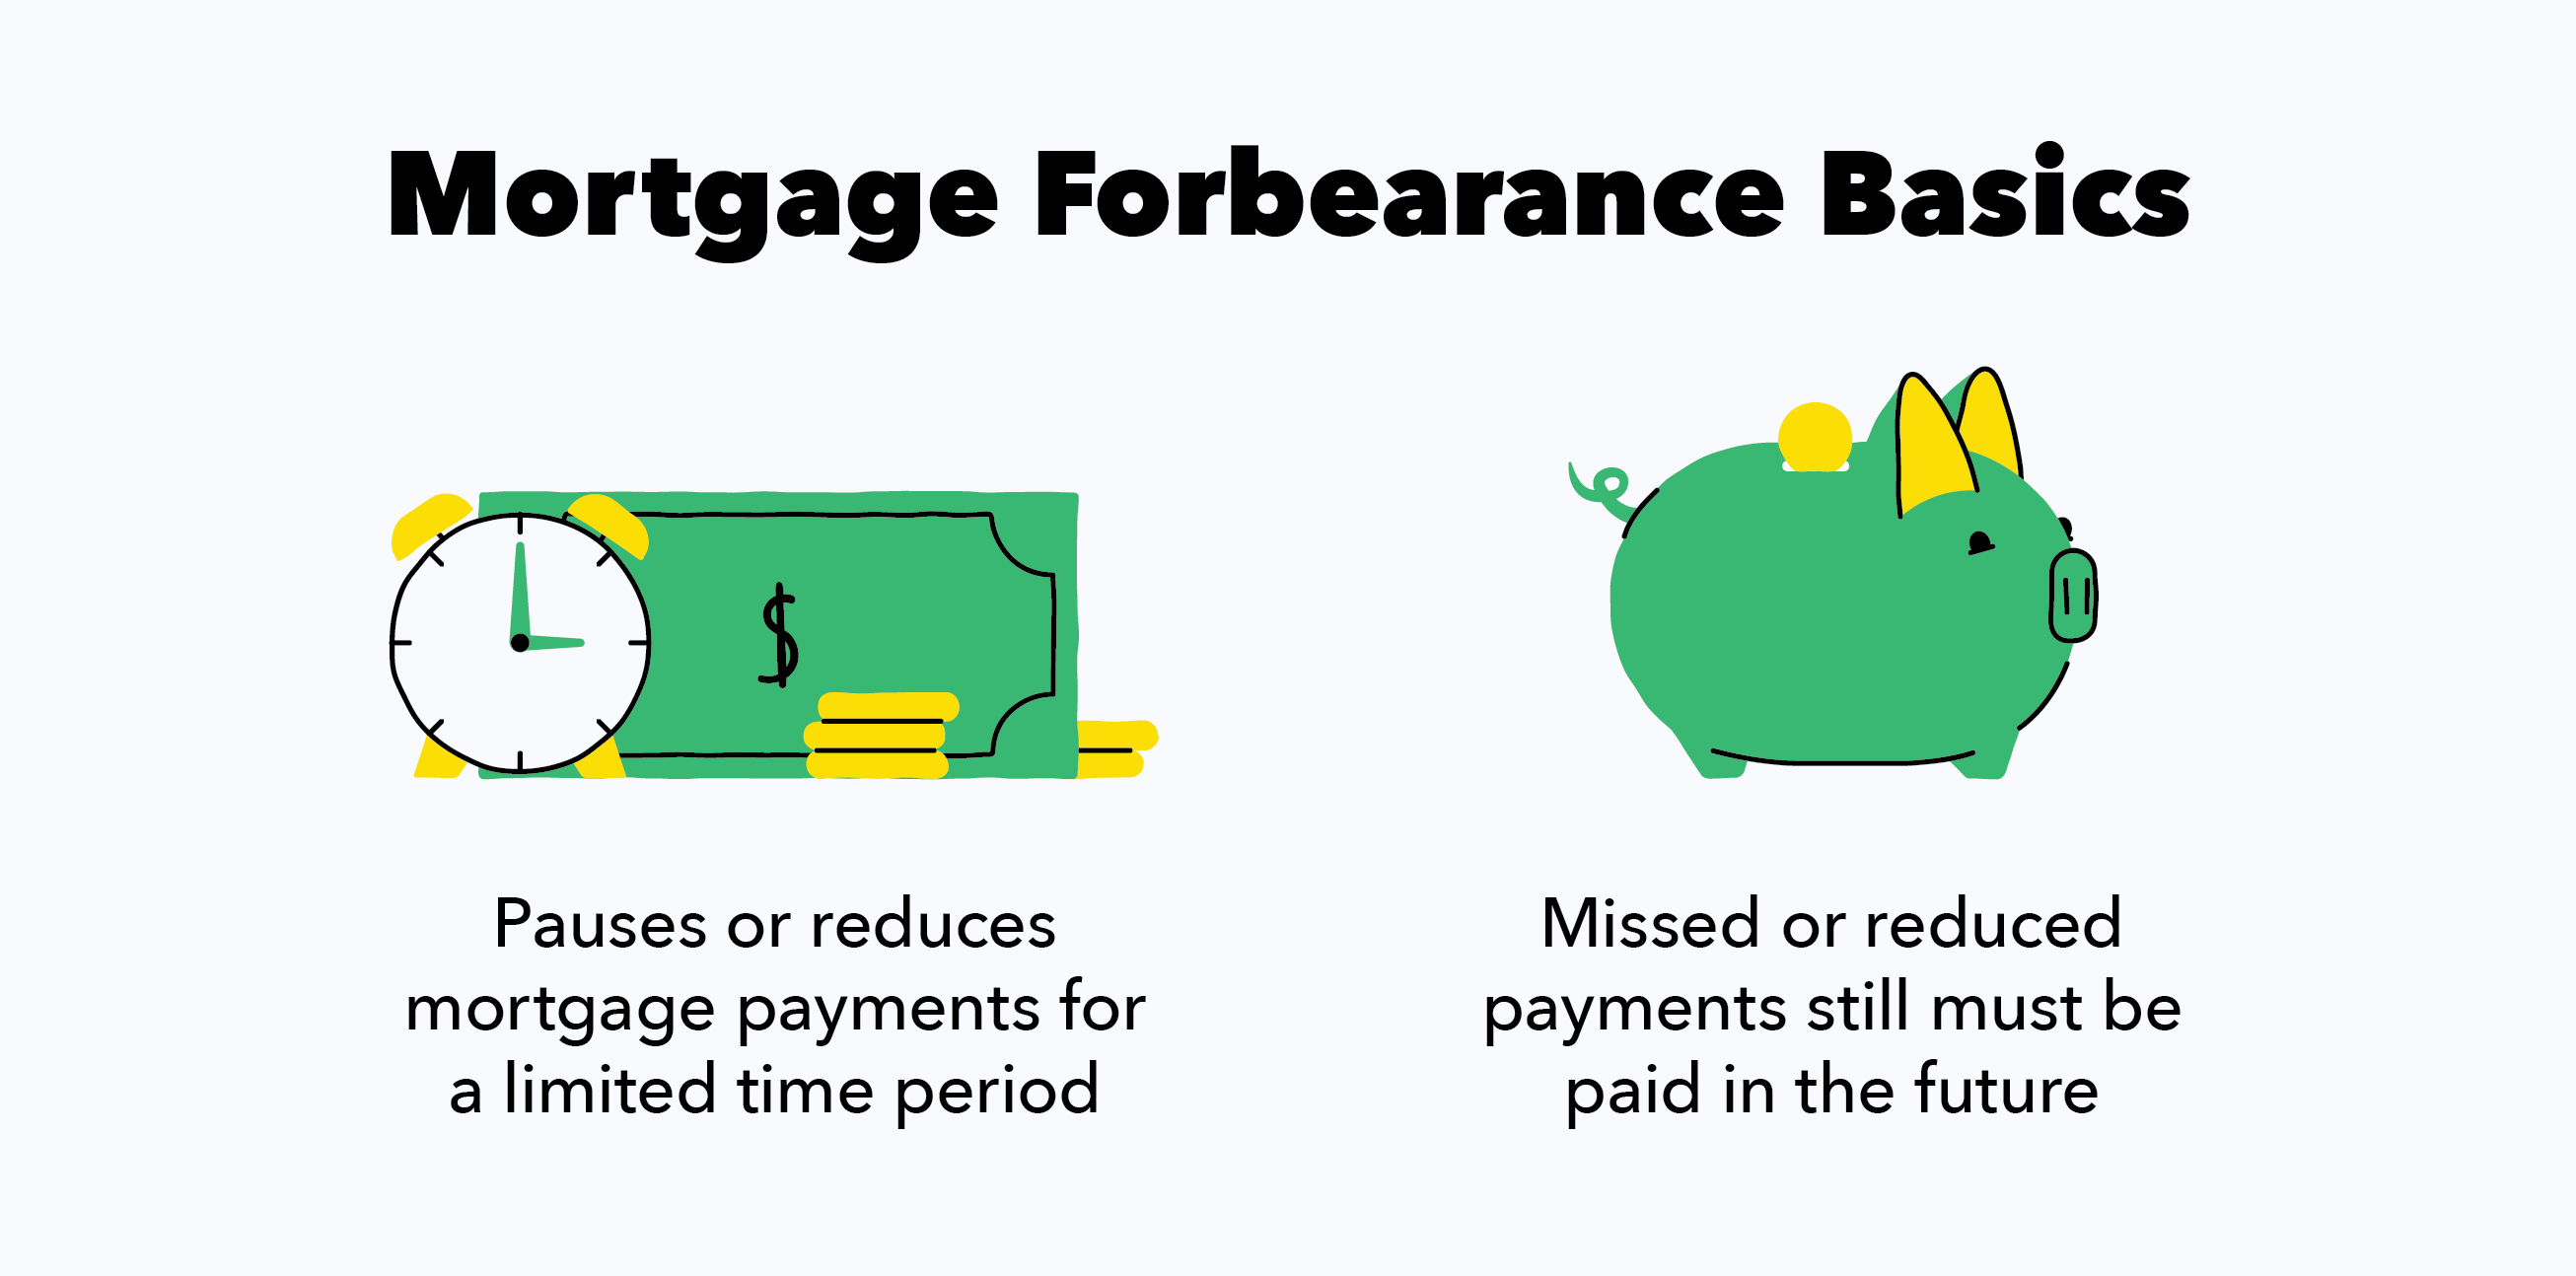 Mortgage forbearance pauses or reduces payments